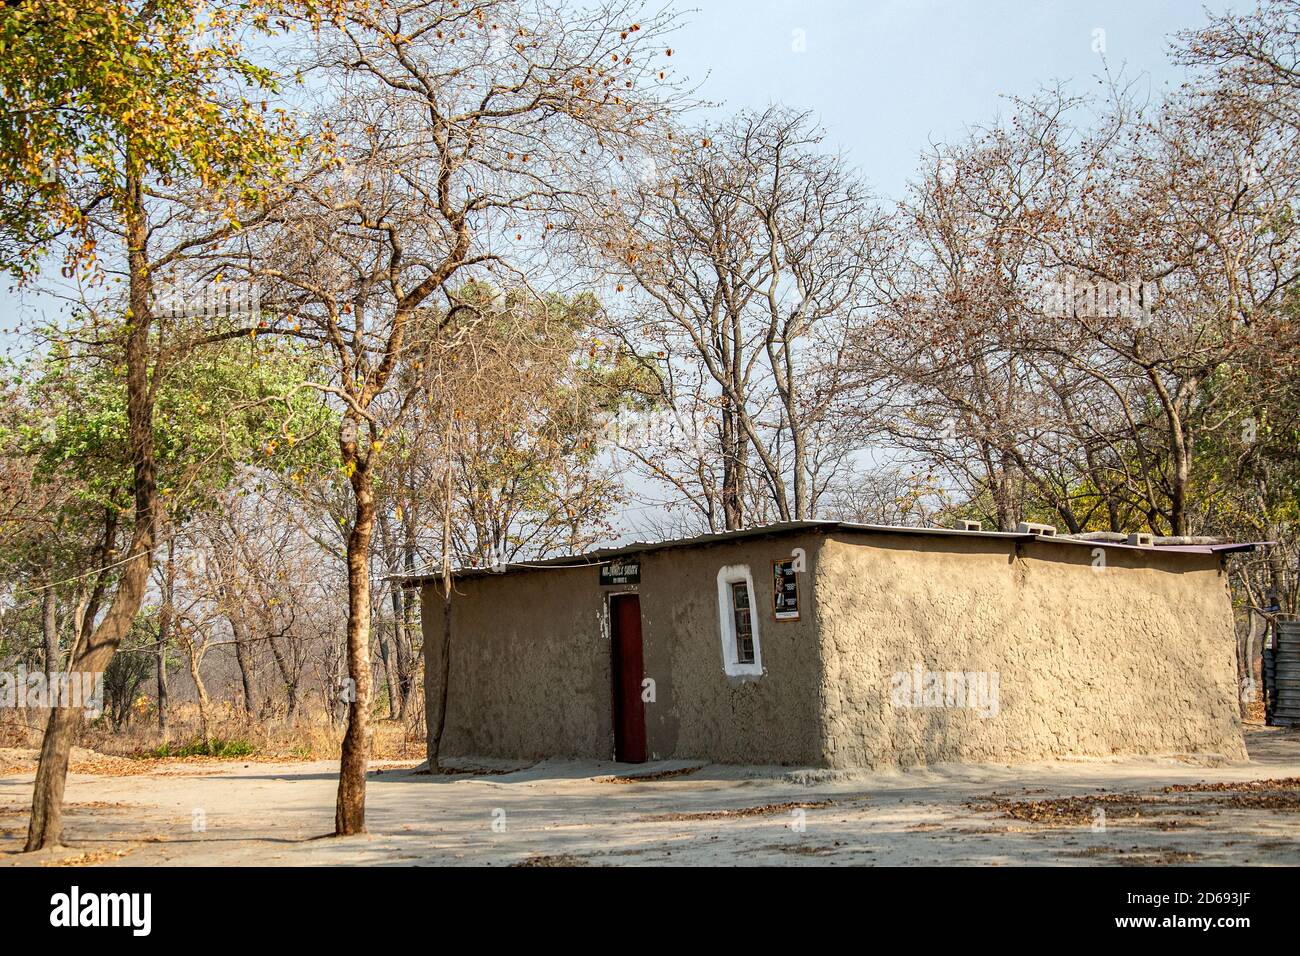 General store made of timber and mud with tin roof in a village in the Kalimbeza (Kalambesa) area near to Katima Mulilo in Namibia. Stock Photo